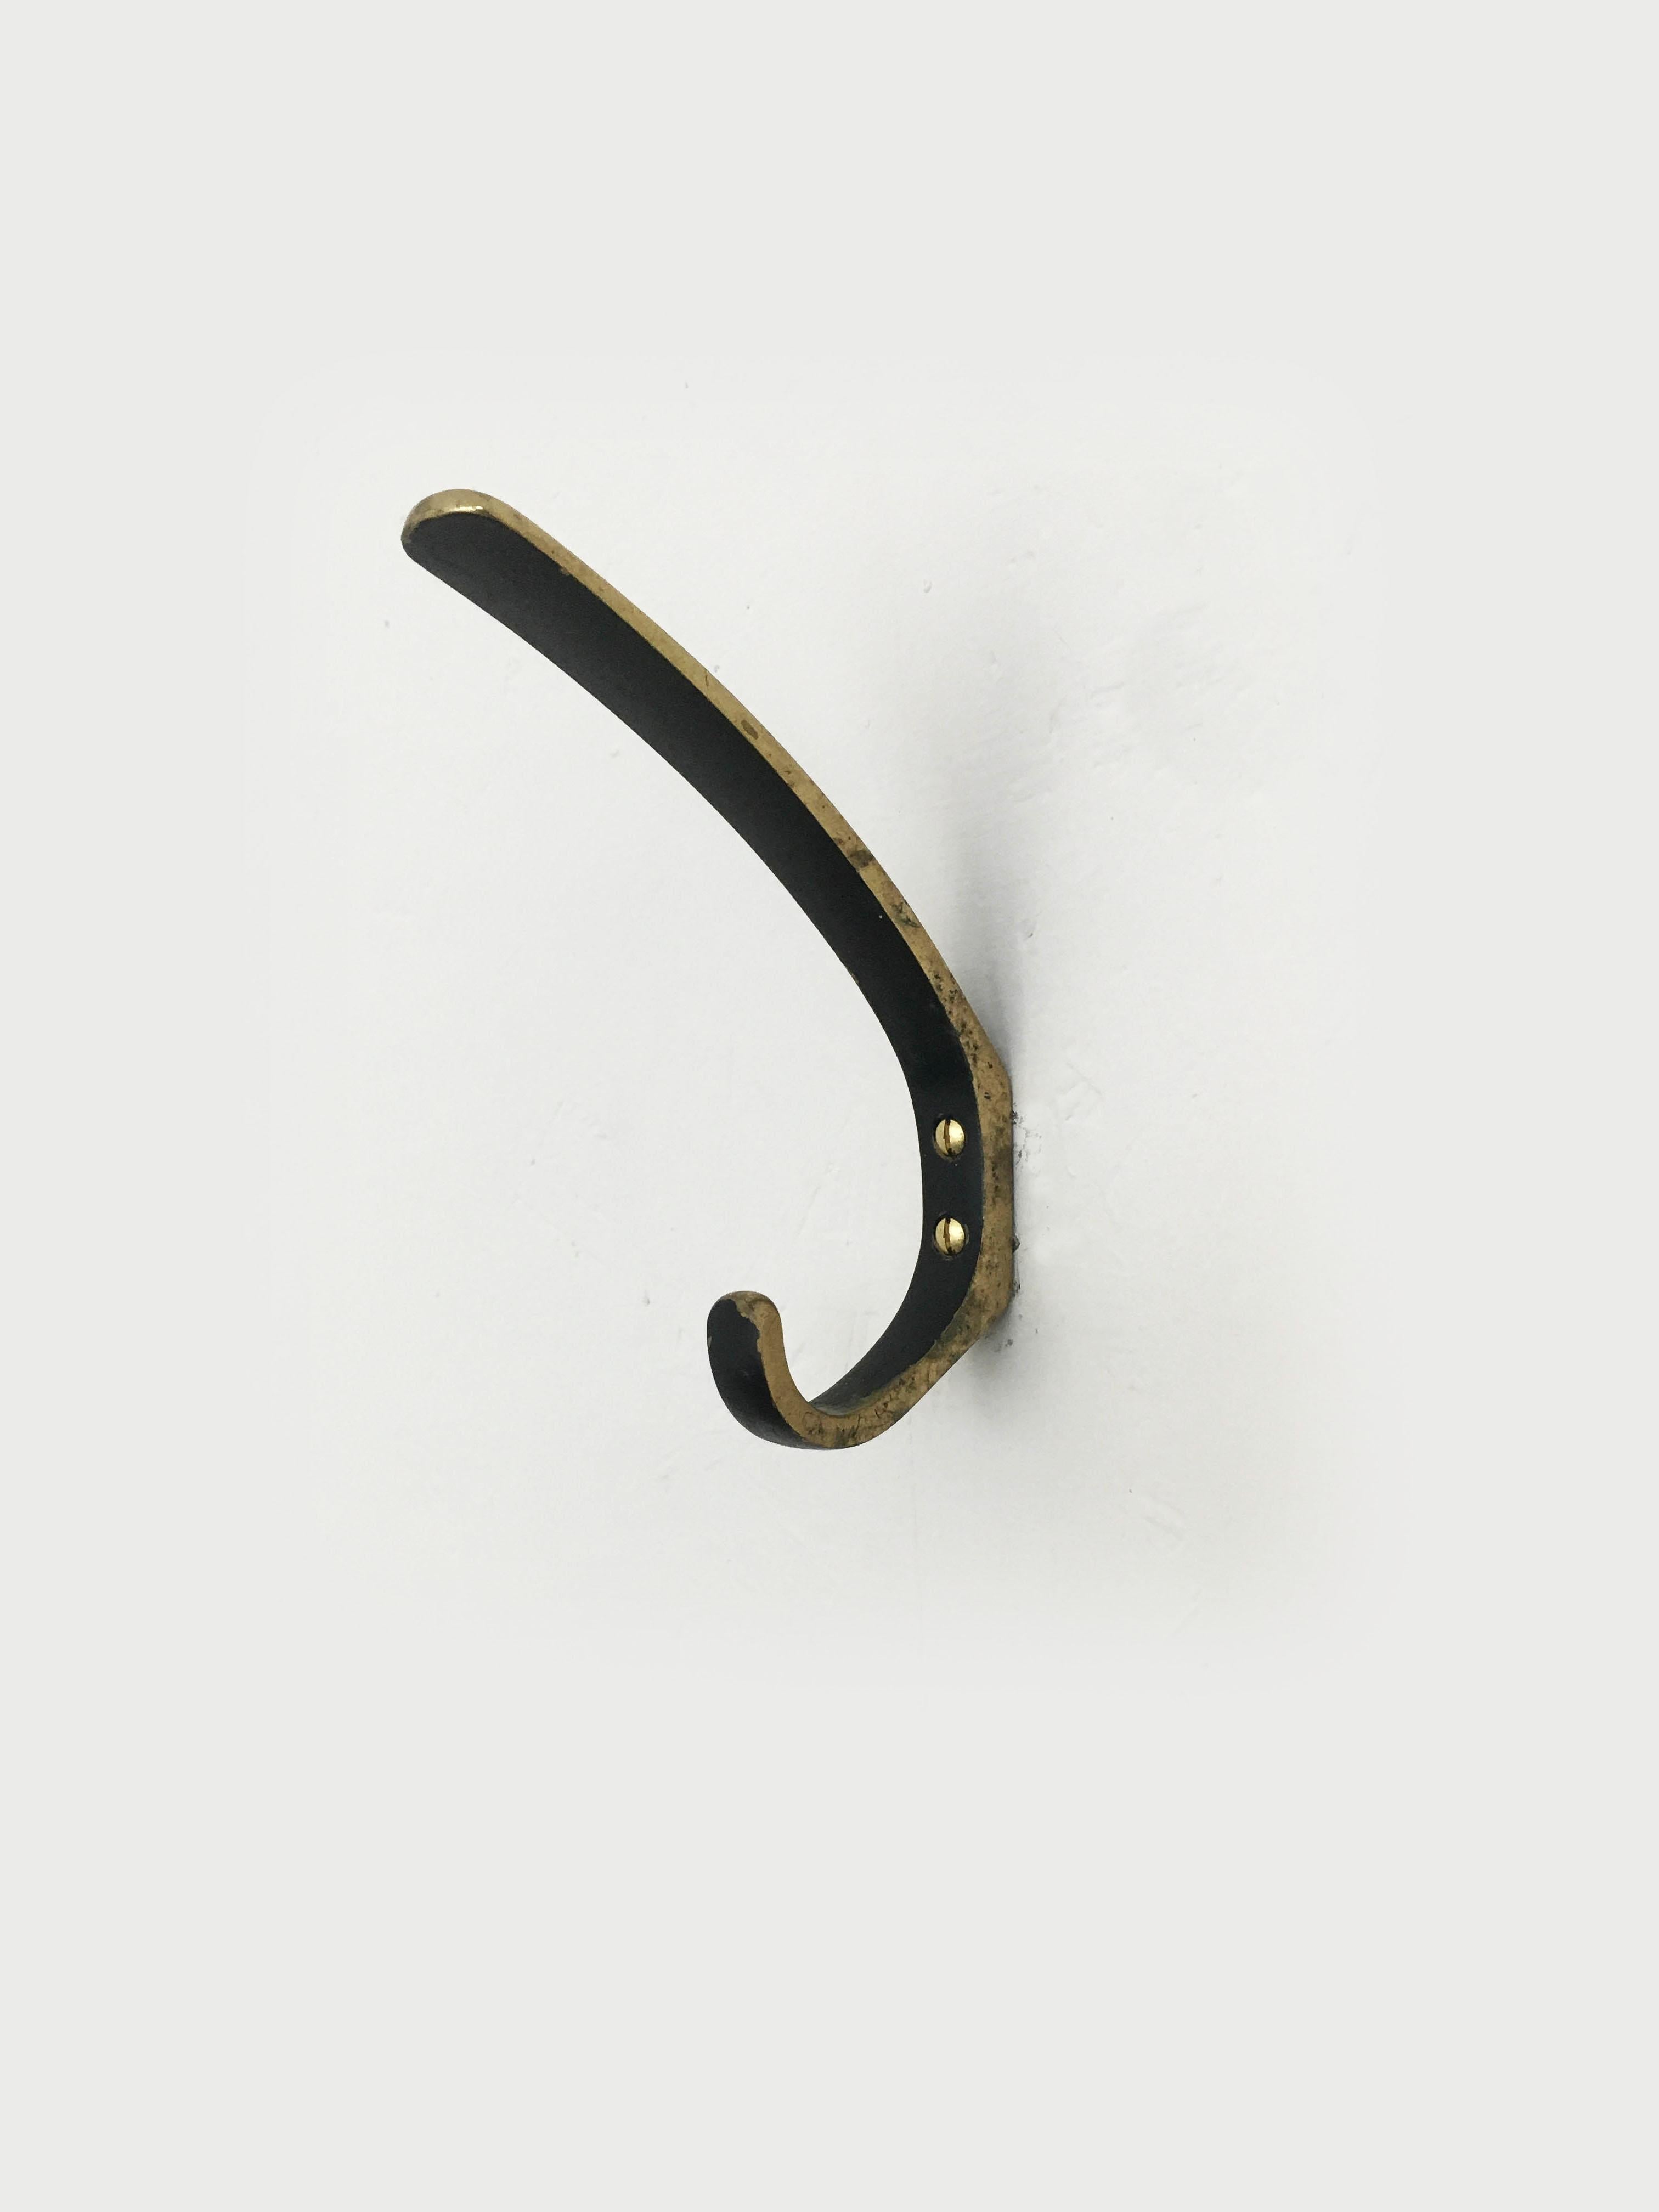 A set of six beautiful Austrian brass wall hooks, made of solid black-finished brass, partly polished, executed in the 1950s by Hertha Baller, Austria. In good condition, with nice patina. Priced as a set of six.